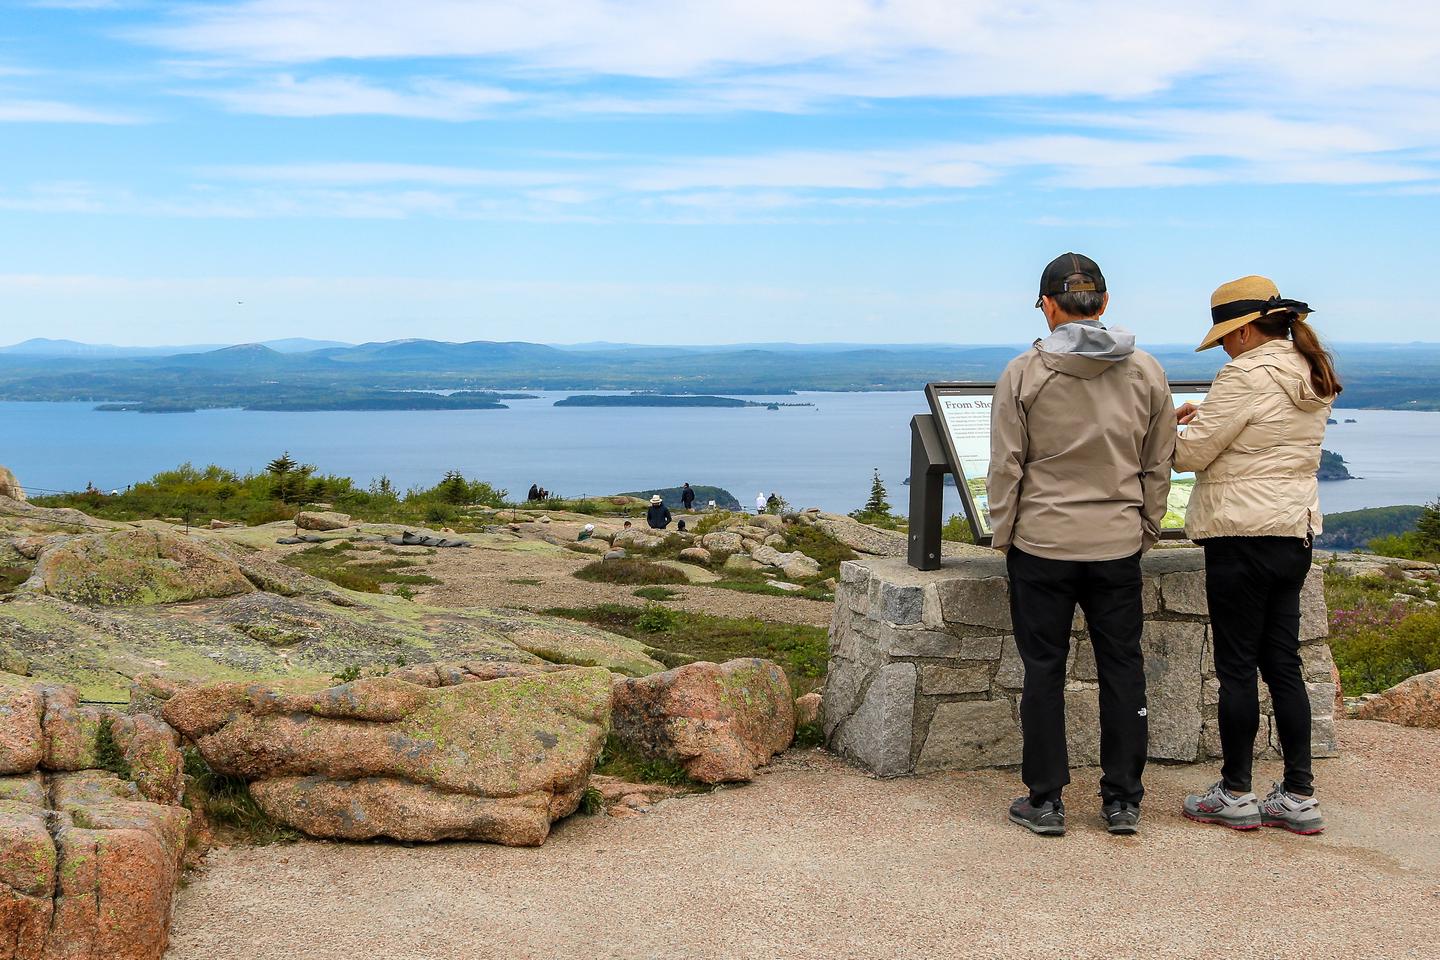 A man and woman dressed in light coats and dark pants with hats stand next to each other in front of an interpretive panel overlooking the ocean and distant mountains from the top of a mountain.Interpretive display at the Cadillac Summit.